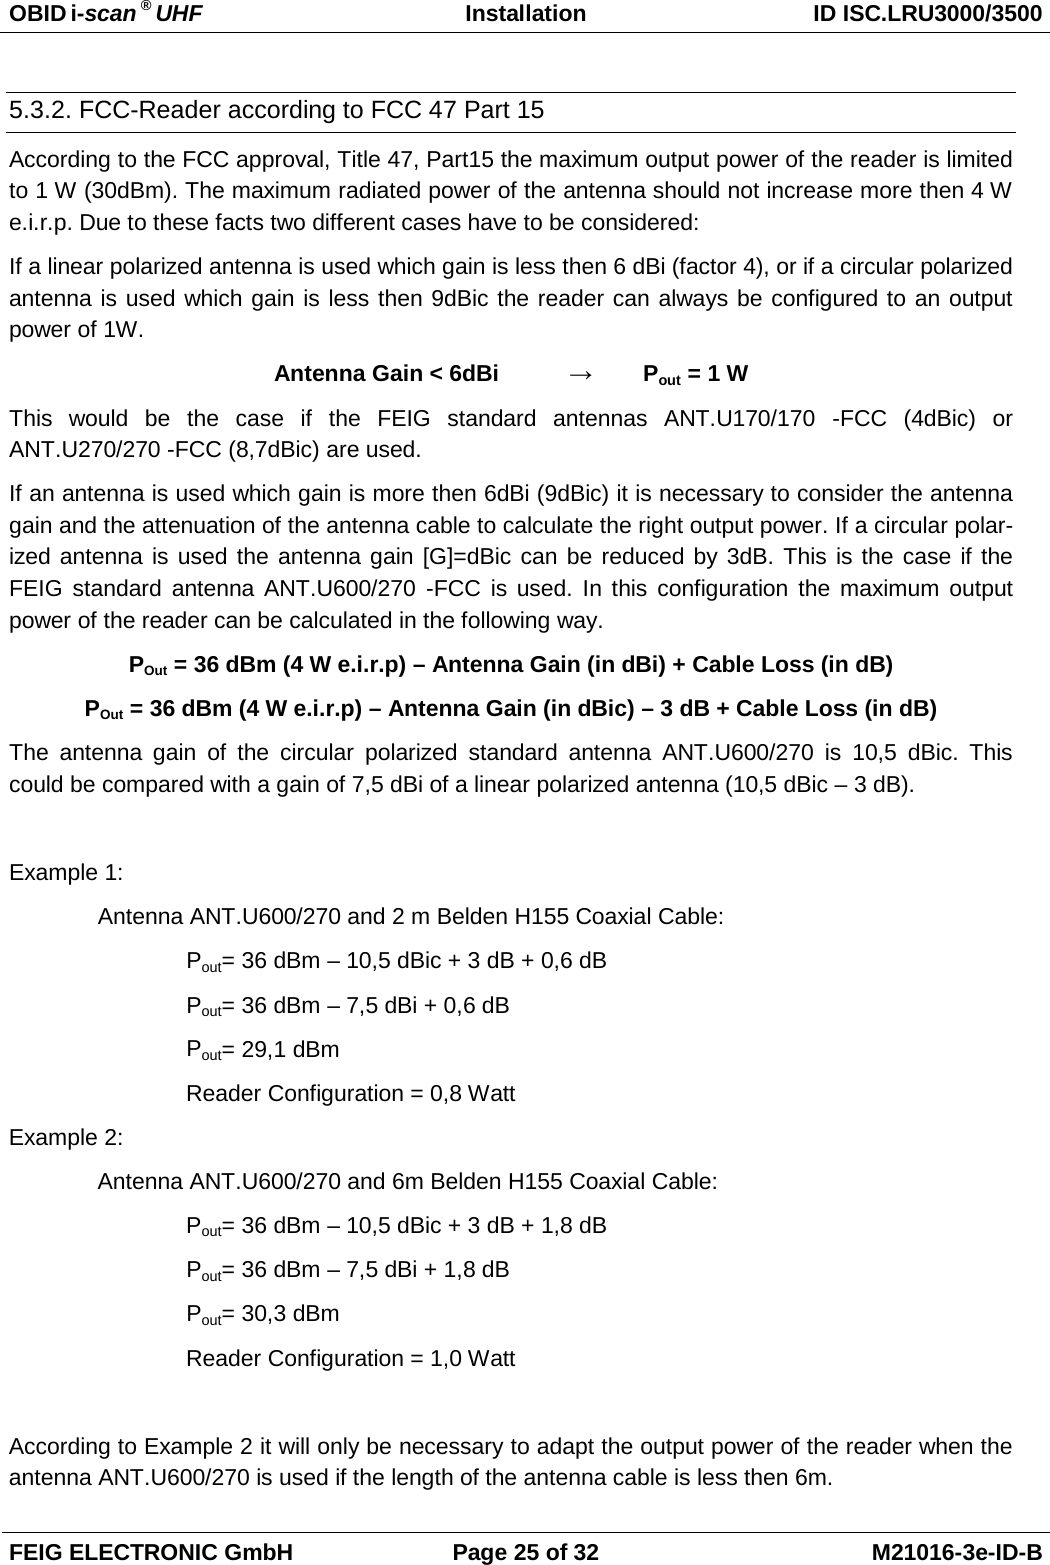 OBID i-scan ® UHF Installation ID ISC.LRU3000/3500  FEIG ELECTRONIC GmbH Page 25 of 32 M21016-3e-ID-B  5.3.2. FCC-Reader according to FCC 47 Part 15 According to the FCC approval, Title 47, Part15 the maximum output power of the reader is limited to 1 W (30dBm). The maximum radiated power of the antenna should not increase more then 4 W e.i.r.p. Due to these facts two different cases have to be considered: If a linear polarized antenna is used which gain is less then 6 dBi (factor 4), or if a circular polarized antenna is used which gain is less then 9dBic the reader can always be configured to an output power of 1W. Antenna Gain &lt; 6dBi  →  Pout = 1 W This would be the case if the FEIG standard antennas ANT.U170/170 -FCC (4dBic) or ANT.U270/270 -FCC (8,7dBic) are used. If an antenna is used which gain is more then 6dBi (9dBic) it is necessary to consider the antenna gain and the attenuation of the antenna cable to calculate the right output power. If a circular polar-ized antenna is used the antenna gain [G]=dBic can be reduced by 3dB. This is the case if the FEIG standard antenna ANT.U600/270 -FCC is used. In this configuration the maximum output power of the reader can be calculated in the following way. POut = 36 dBm (4 W e.i.r.p) – Antenna Gain (in dBi) + Cable Loss (in dB) POut = 36 dBm (4 W e.i.r.p) – Antenna Gain (in dBic) – 3 dB + Cable Loss (in dB) The antenna gain of the circular polarized standard antenna ANT.U600/270 is 10,5 dBic. This could be compared with a gain of 7,5 dBi of a linear polarized antenna (10,5 dBic – 3 dB).   Example 1: Antenna ANT.U600/270 and 2 m Belden H155 Coaxial Cable: Pout= 36 dBm – 10,5 dBic + 3 dB + 0,6 dB Pout= 36 dBm – 7,5 dBi + 0,6 dB Pout= 29,1 dBm  Reader Configuration = 0,8 Watt Example 2: Antenna ANT.U600/270 and 6m Belden H155 Coaxial Cable: Pout= 36 dBm – 10,5 dBic + 3 dB + 1,8 dB Pout= 36 dBm – 7,5 dBi + 1,8 dB Pout= 30,3 dBm    Reader Configuration = 1,0 Watt  According to Example 2 it will only be necessary to adapt the output power of the reader when the antenna ANT.U600/270 is used if the length of the antenna cable is less then 6m. 